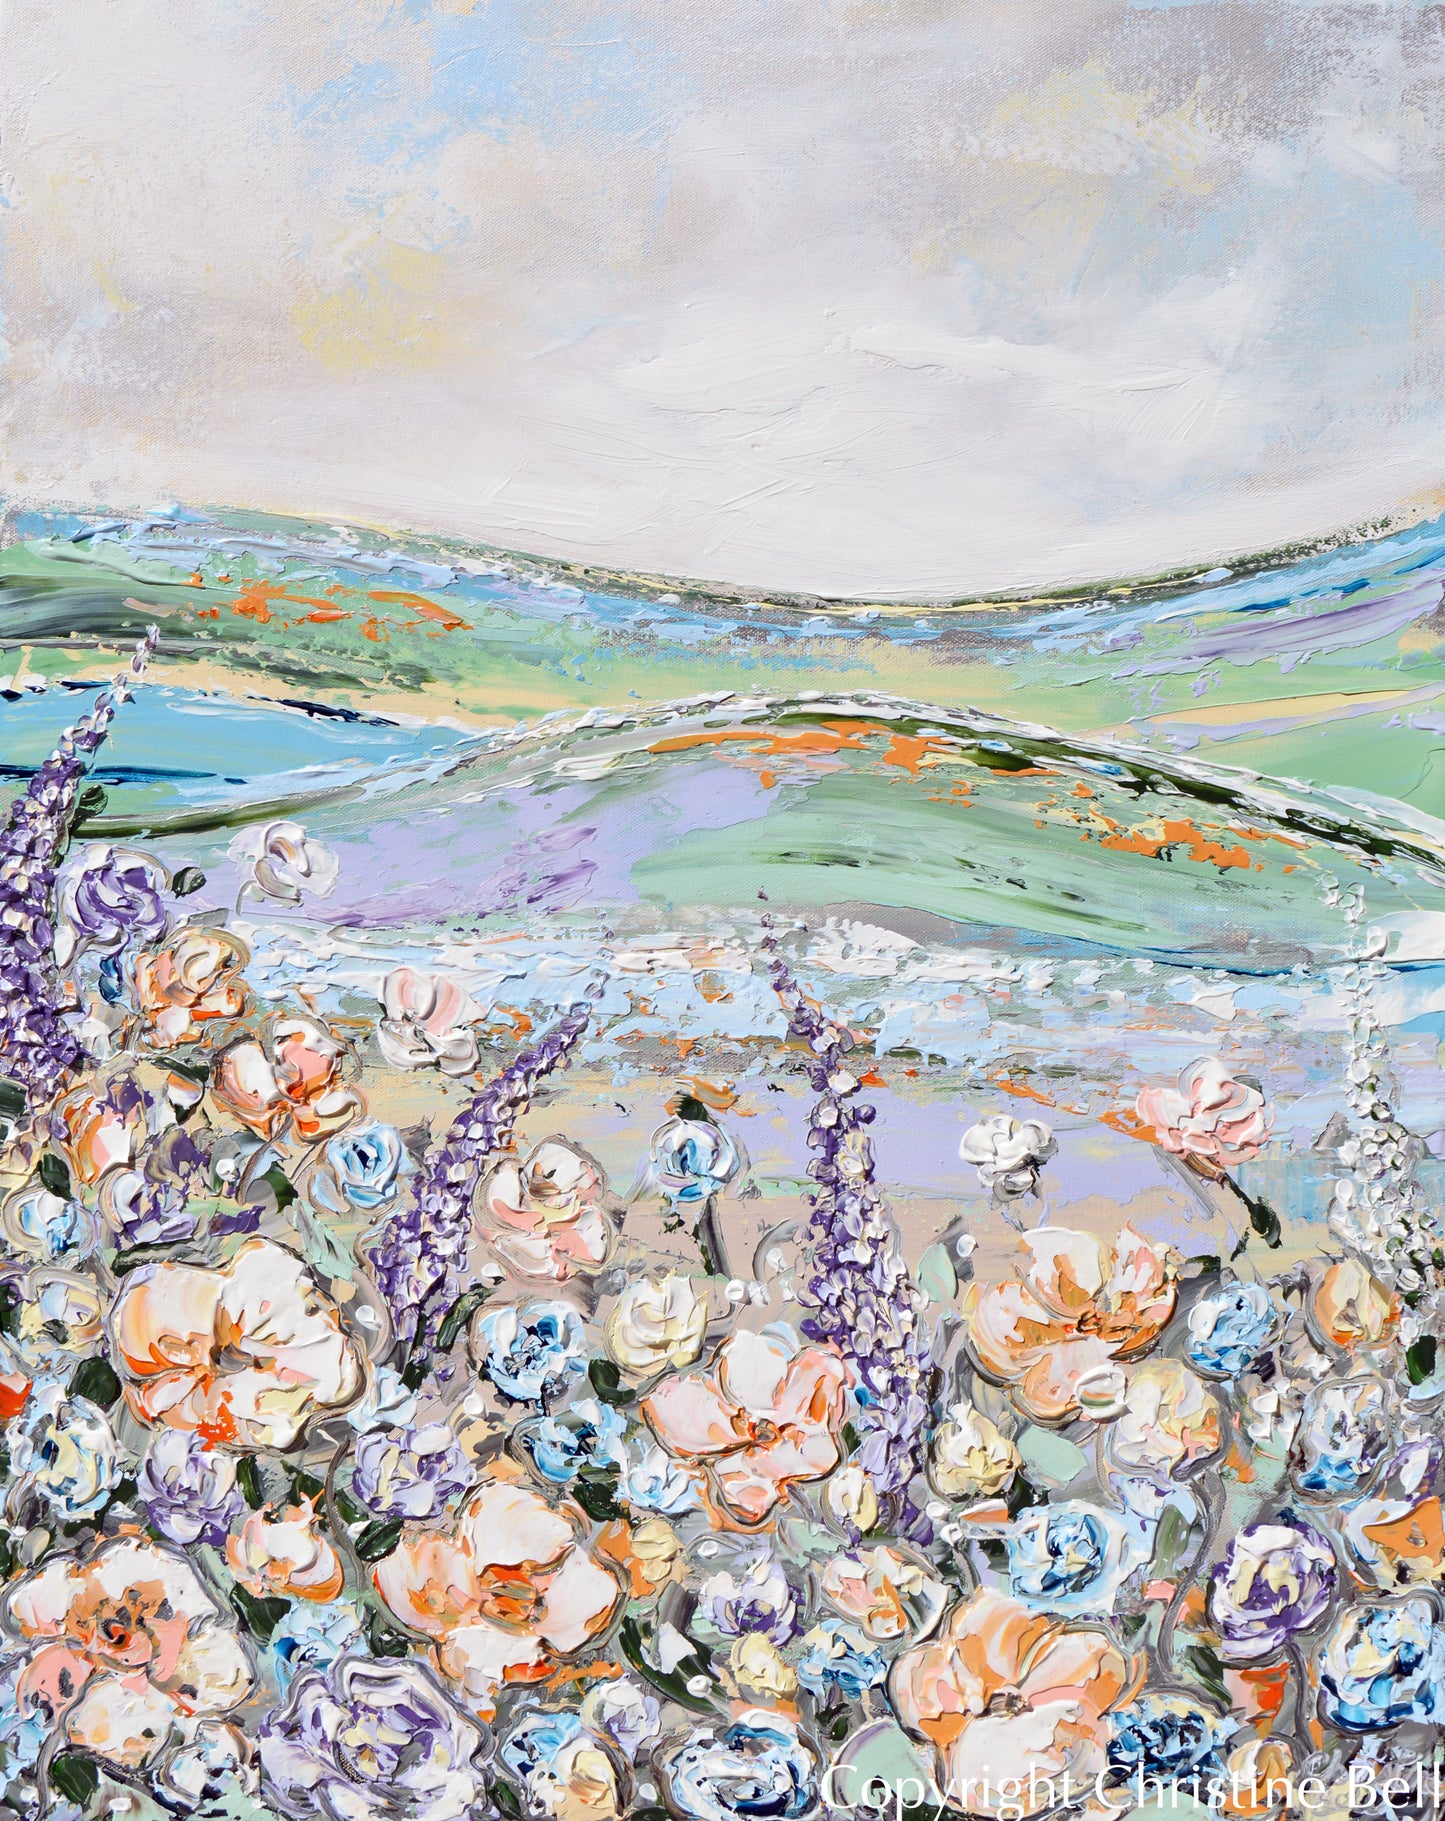 "Wildflower Meadow" ORIGINAL Art Abstract Floral Painting Textured Wildflowers Landscape 24x30"